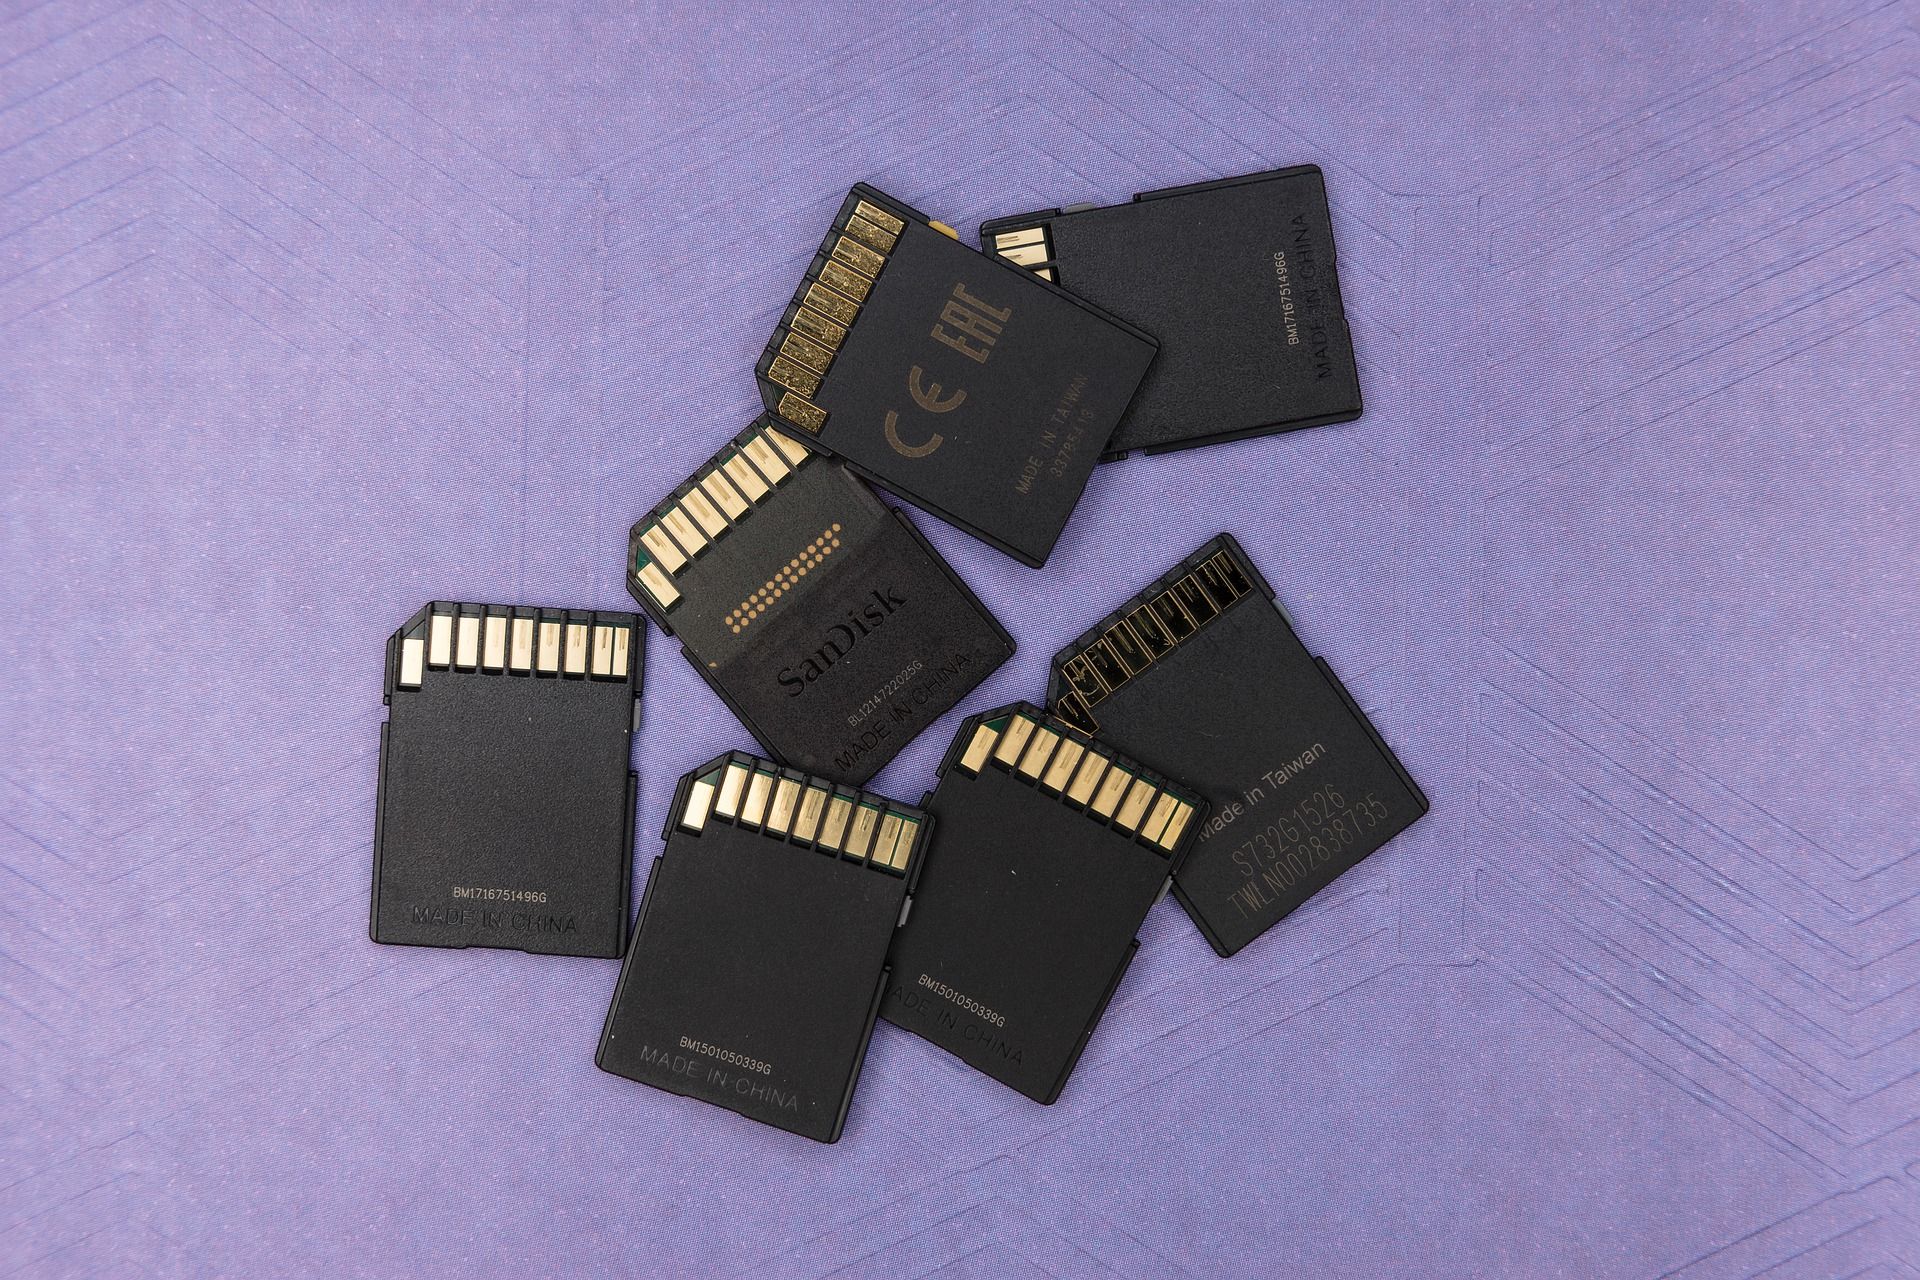 A group of SD cards on a purple background